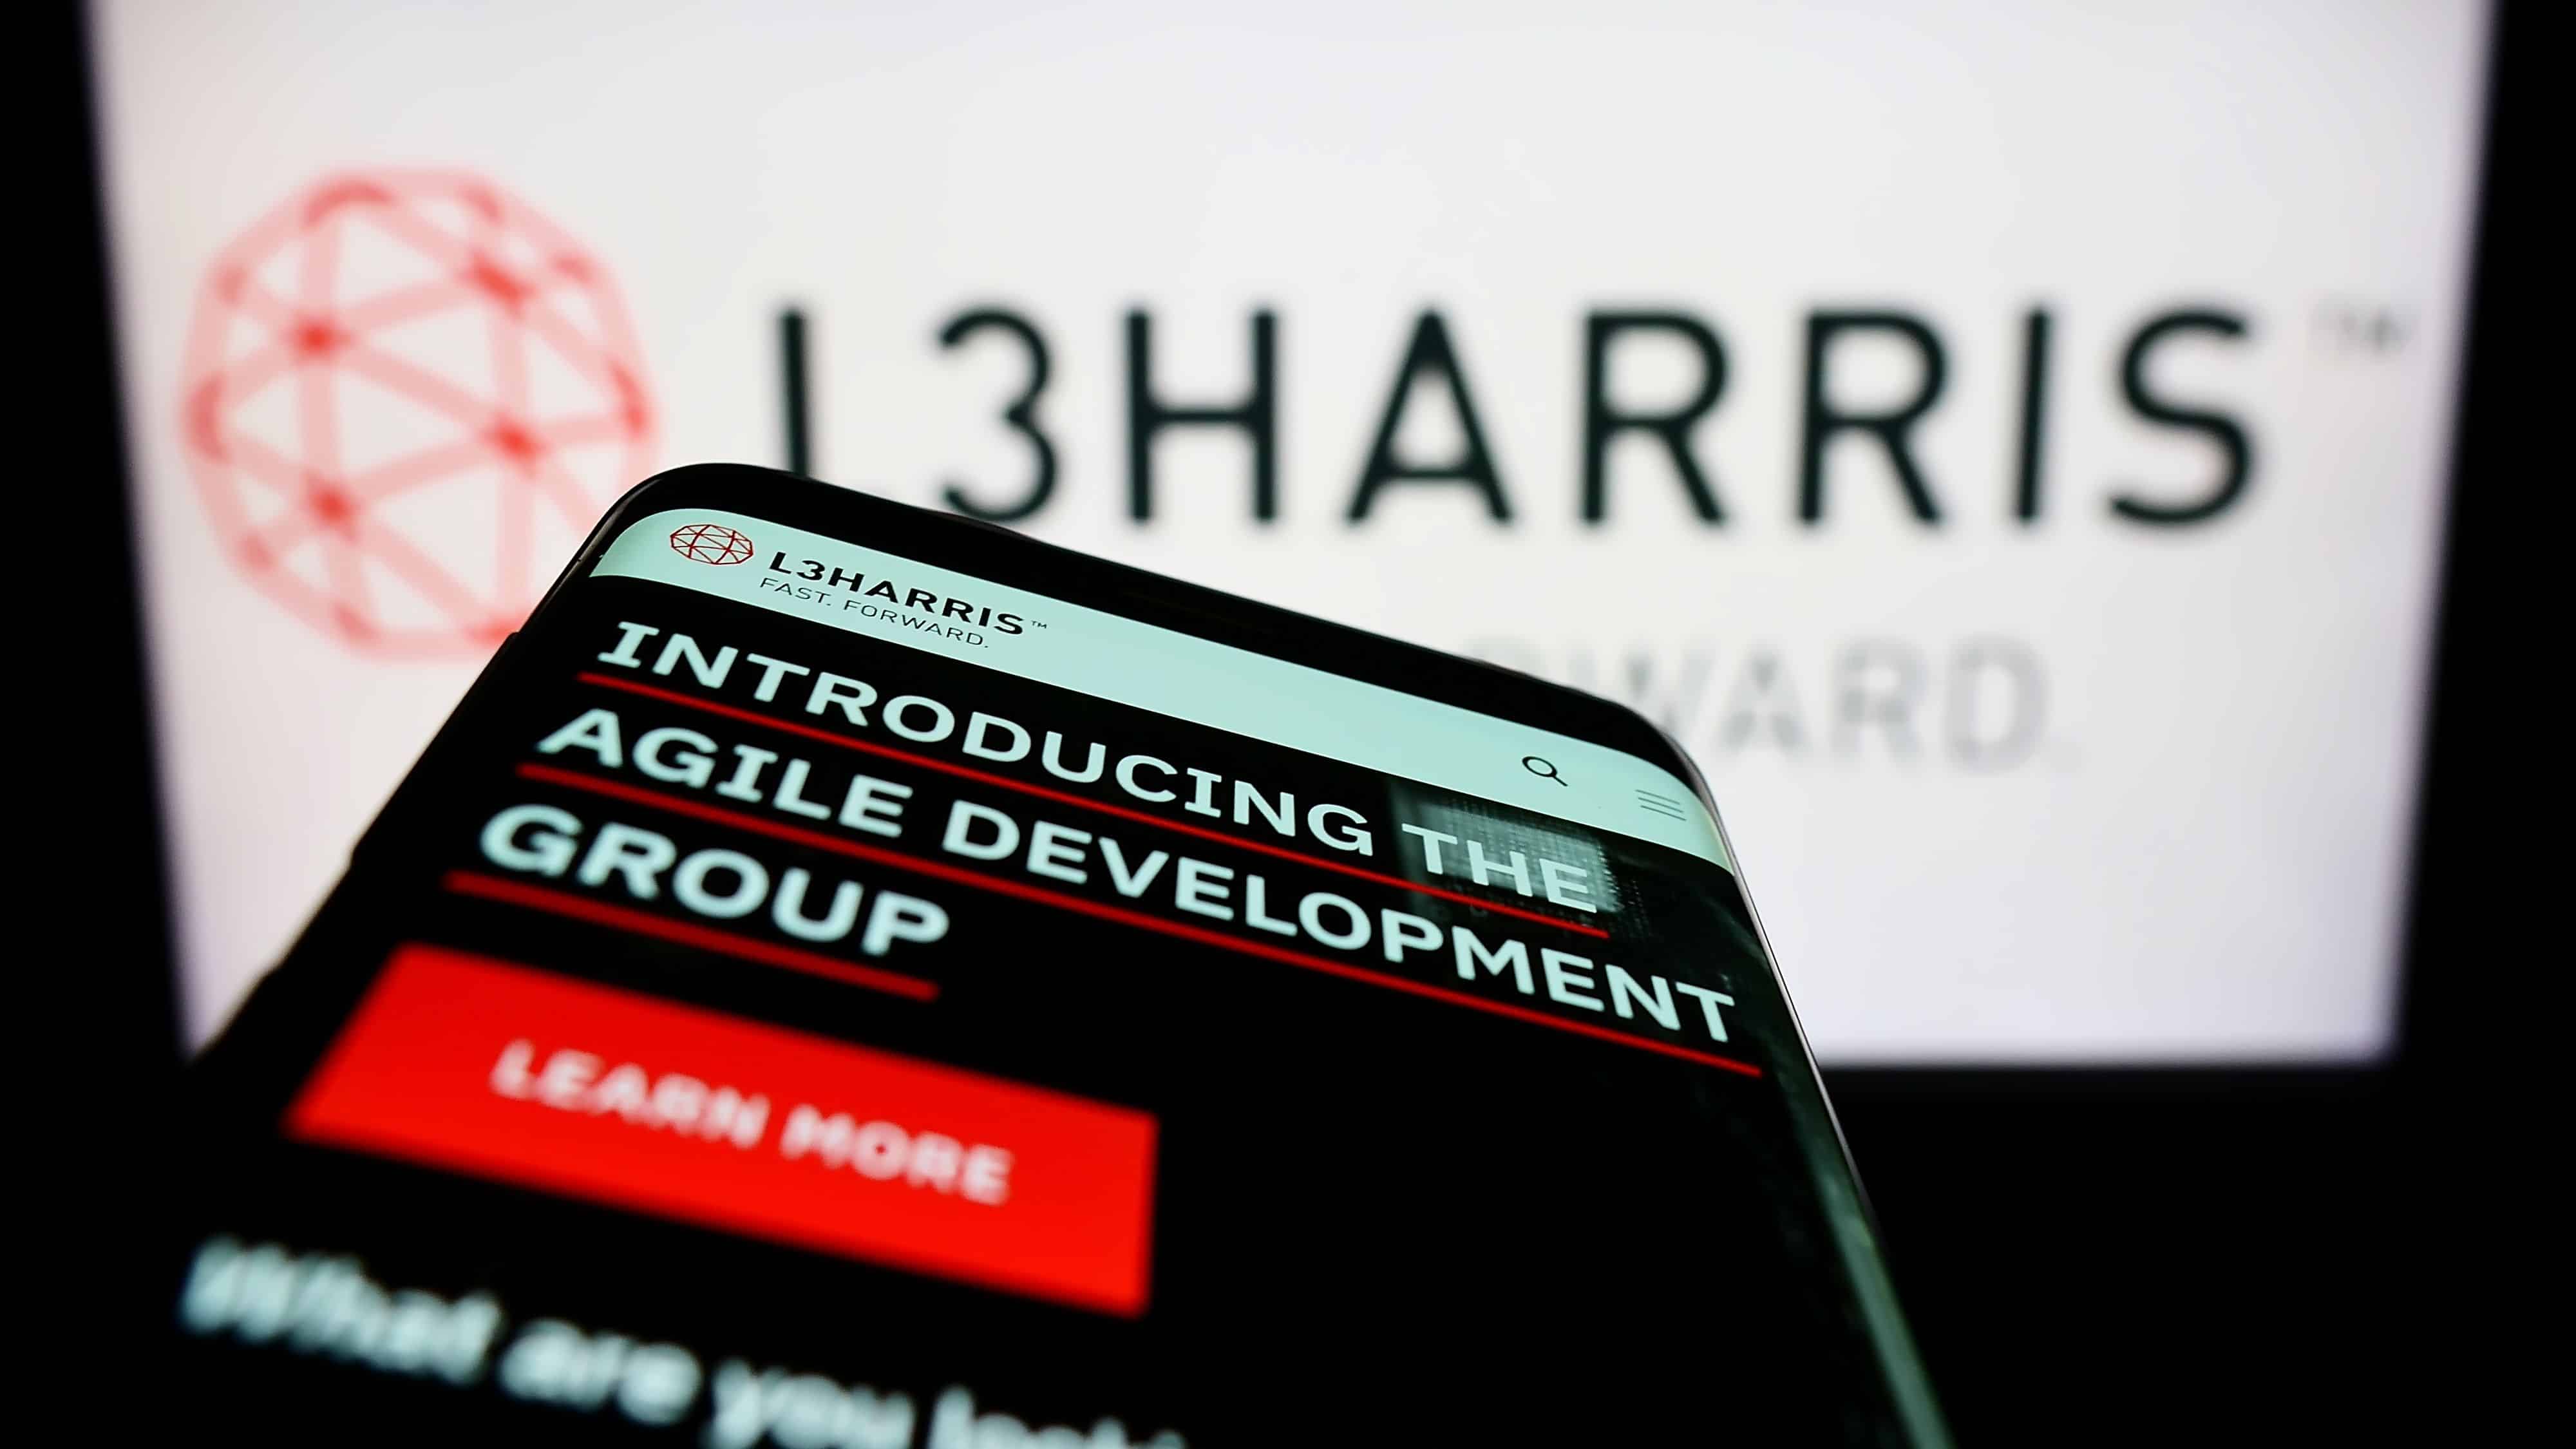 Stuttgart, Germany - 06-18-2022: Mobile phone with website of US aerospace company L3Harris Technologies Inc. on screen in front of logo. Focus on top-left of phone display. Unmodified photo.